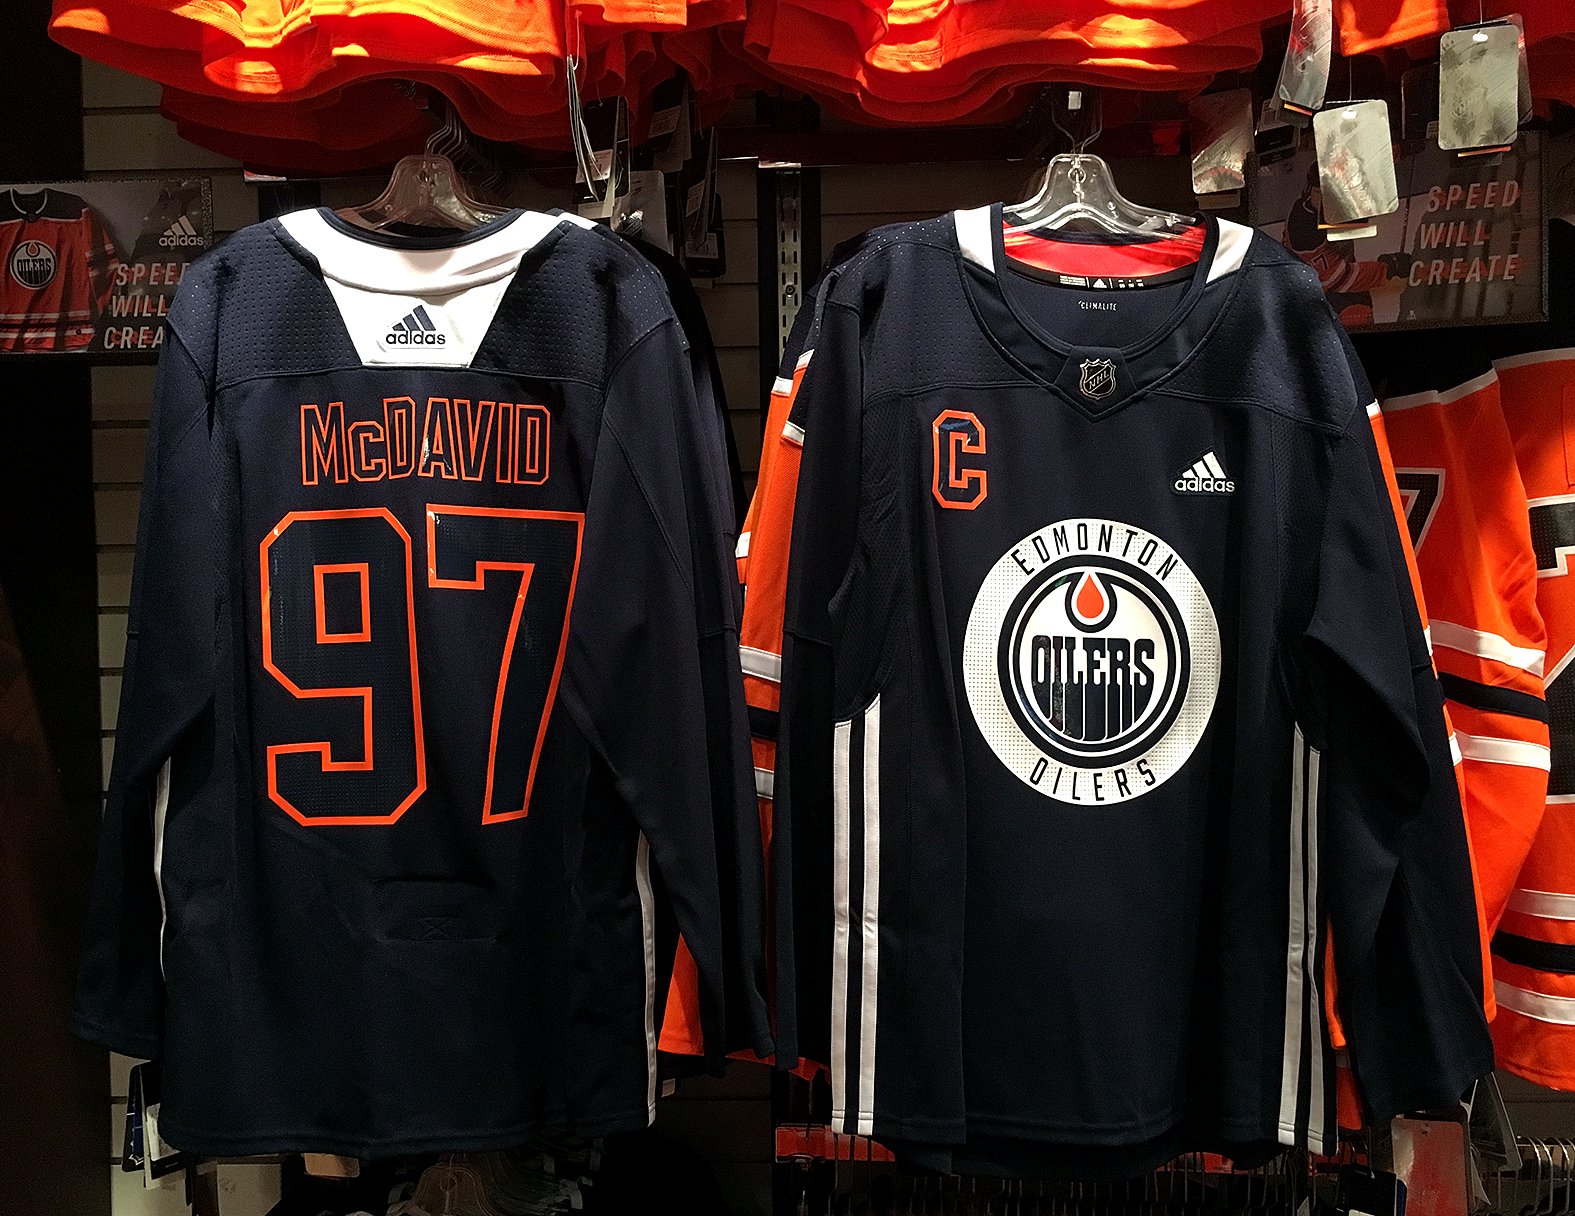 Edmonton Oilers on X: The #Oilers Store's pop-up location is also